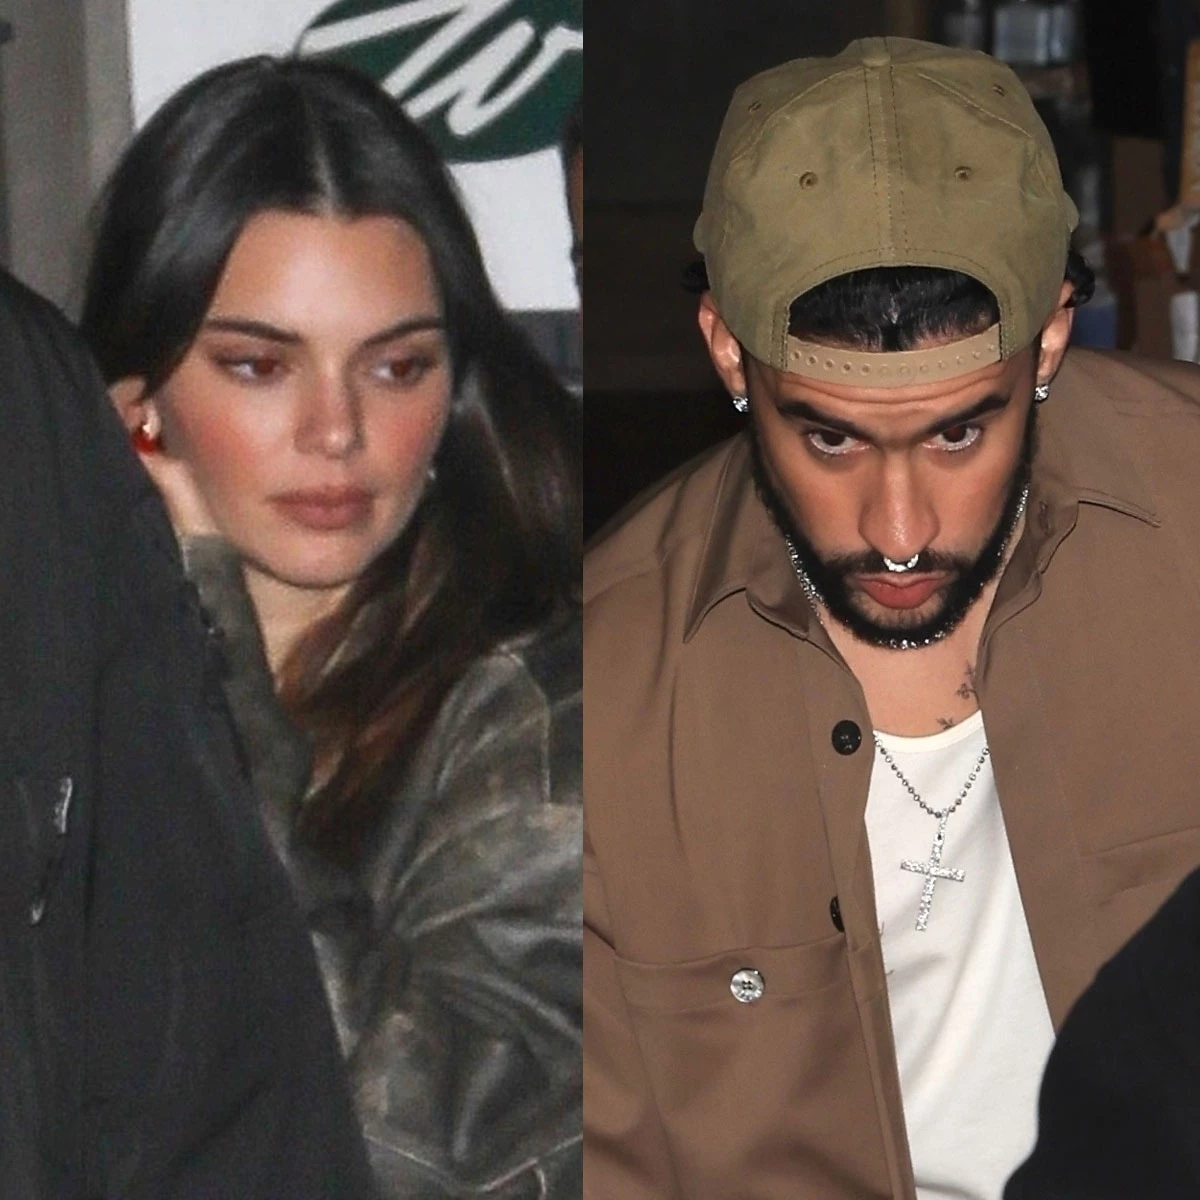 Kendall and Bad Bunny were spotted in a Beverly Hills restaurant